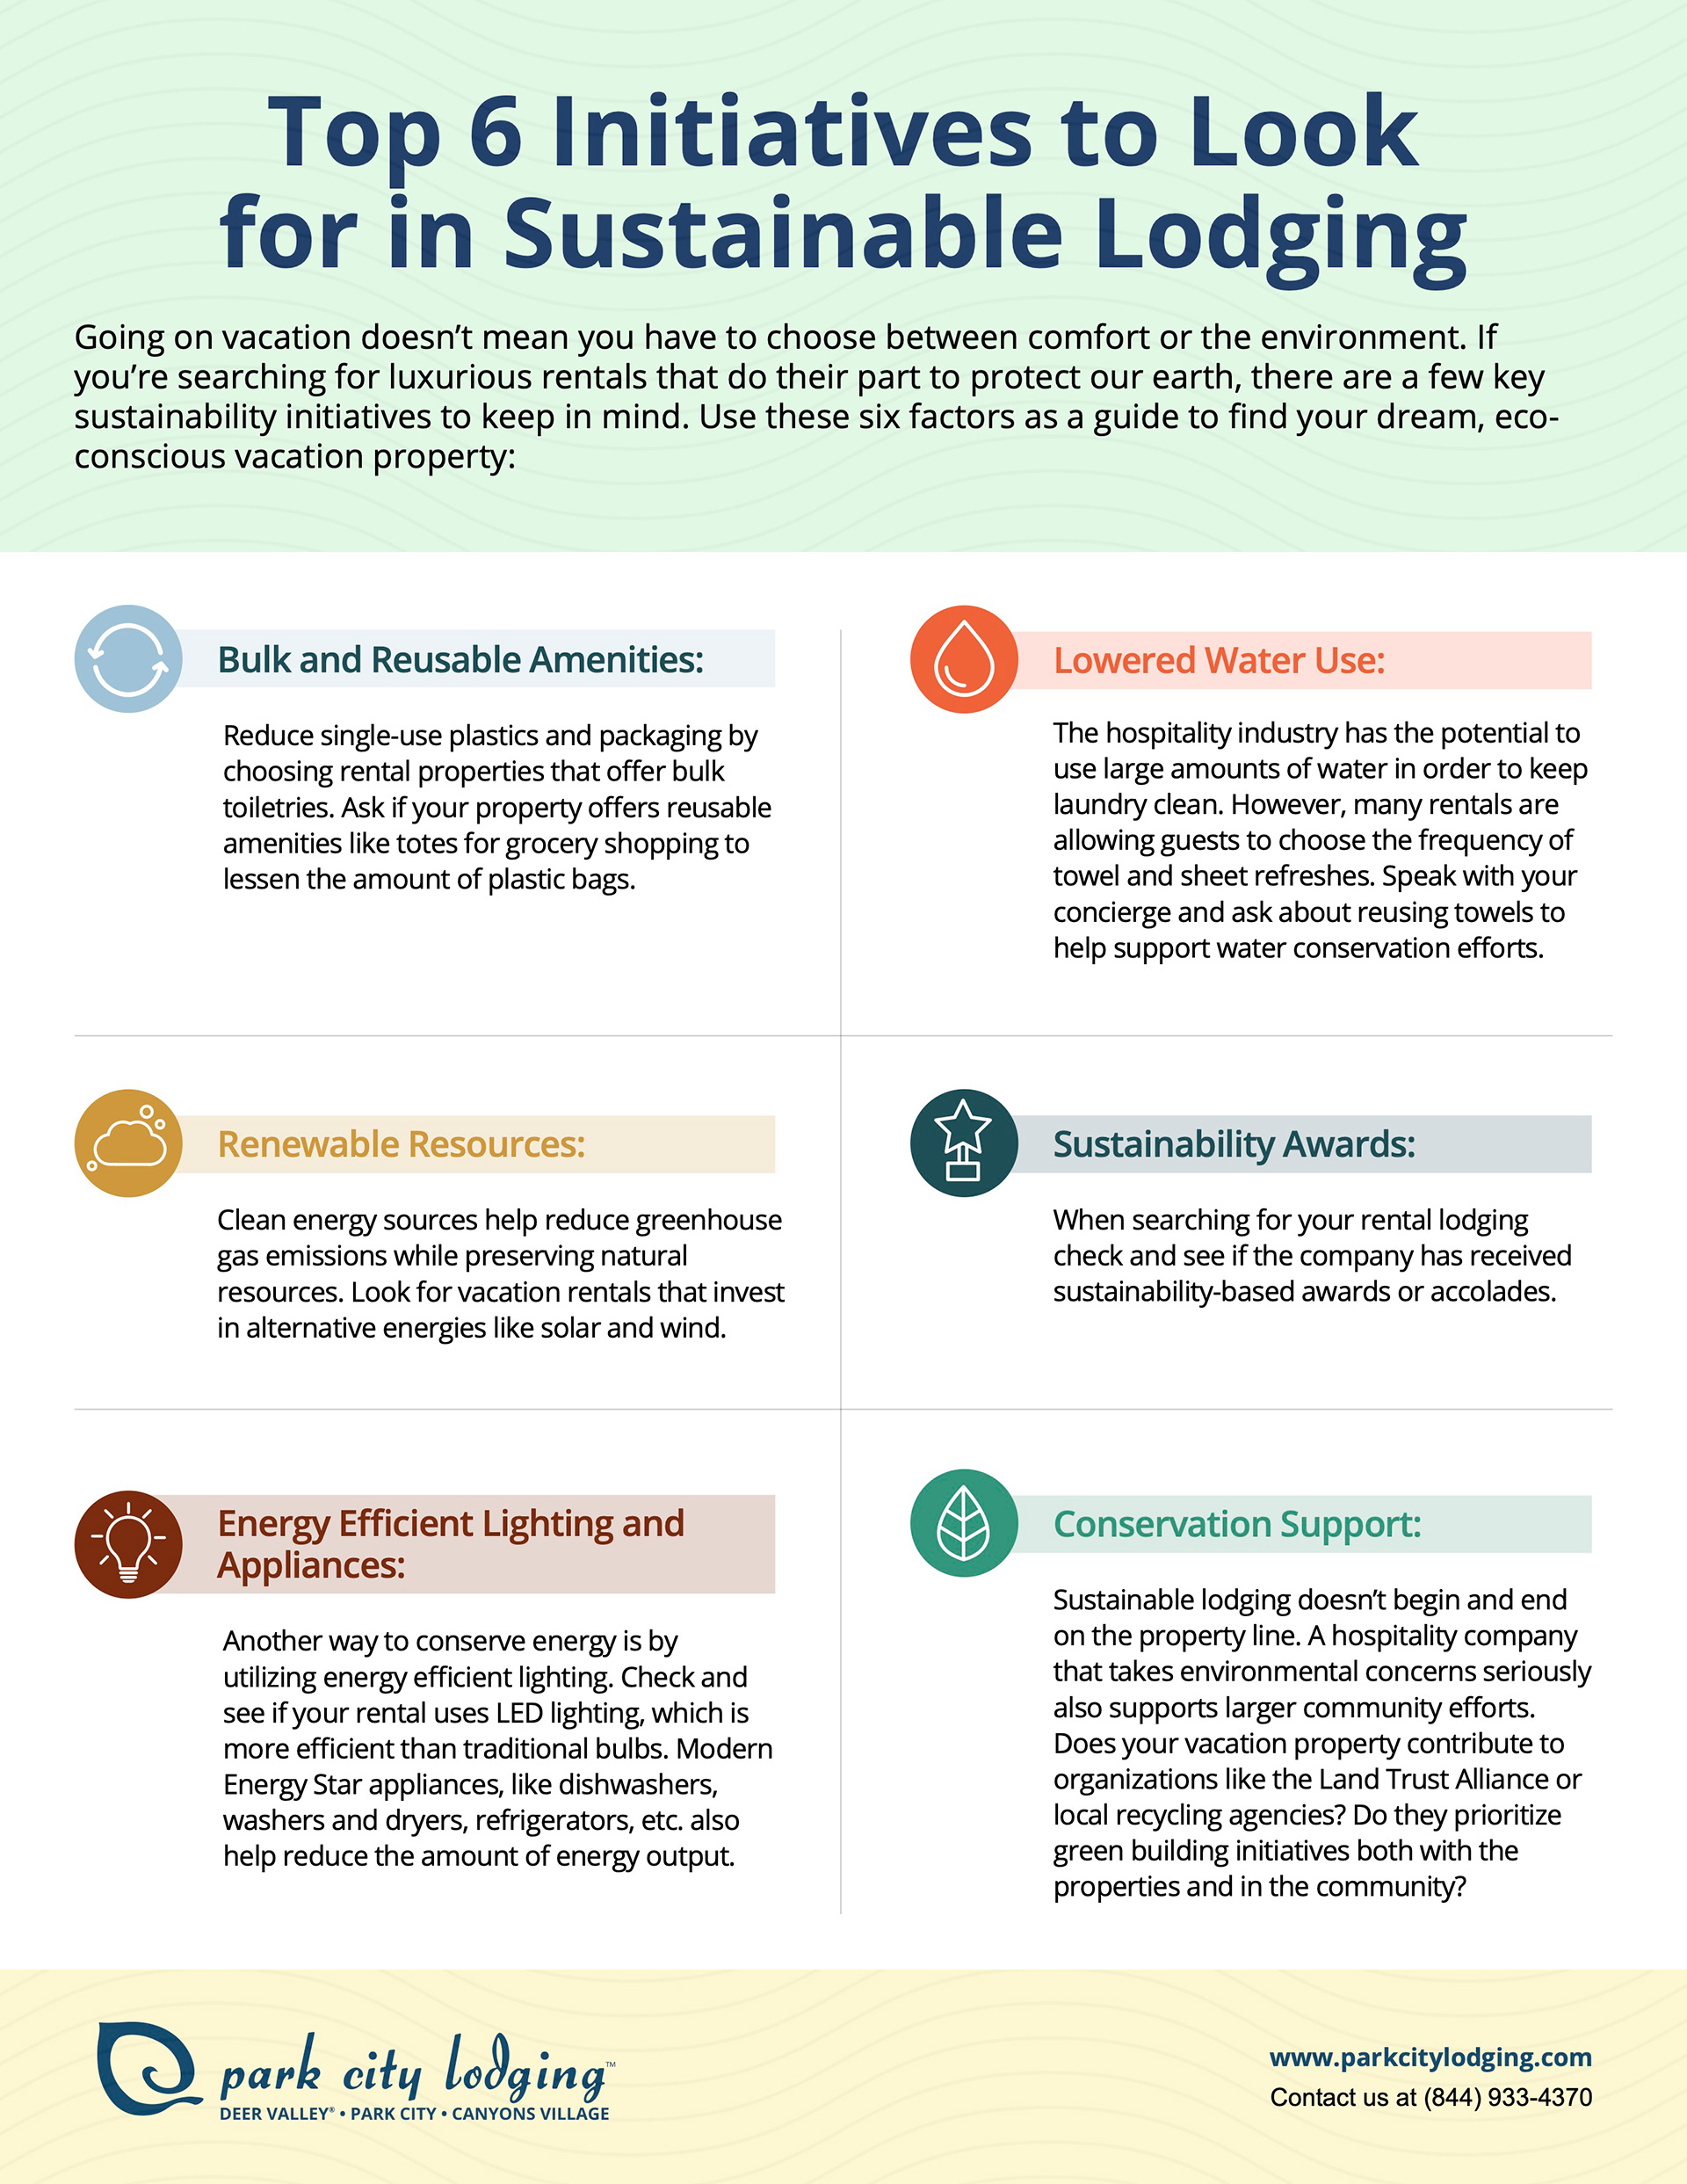 A checklist on the Top 6 Initiatives to Look for in Sustainable Lodging.